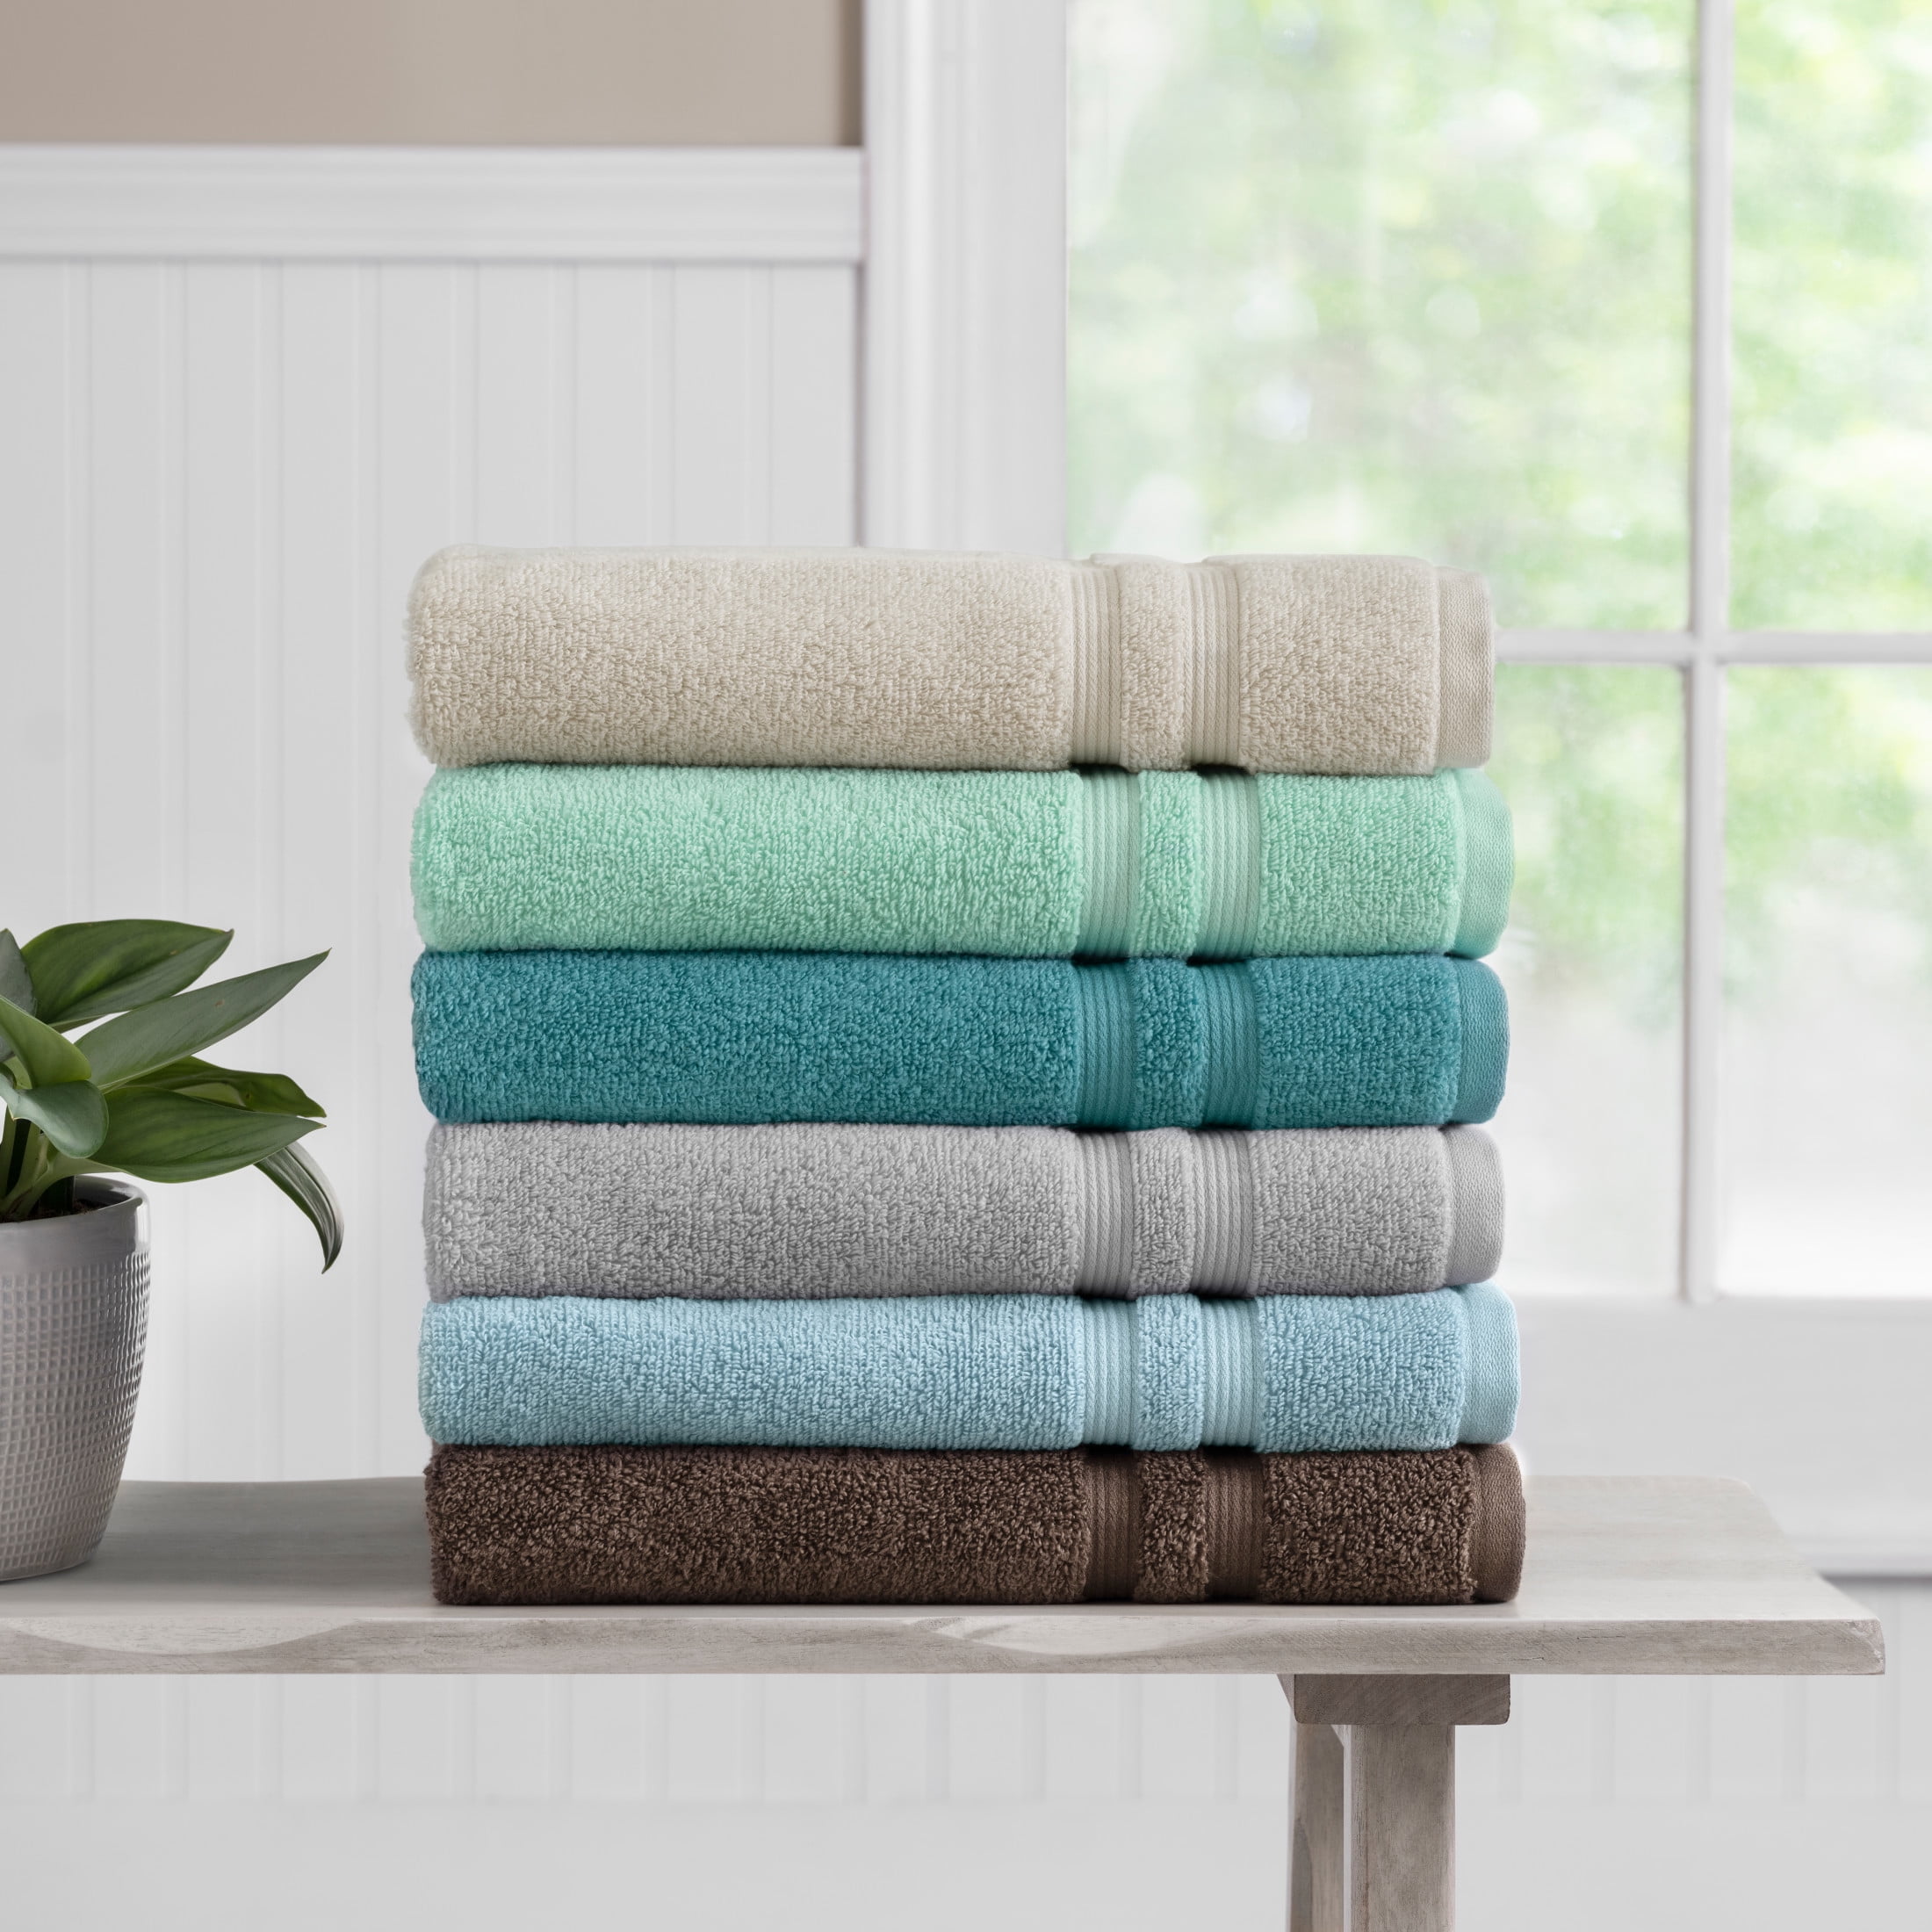 34% off on Towel Oasis 2x 550gsm Cotton Towels